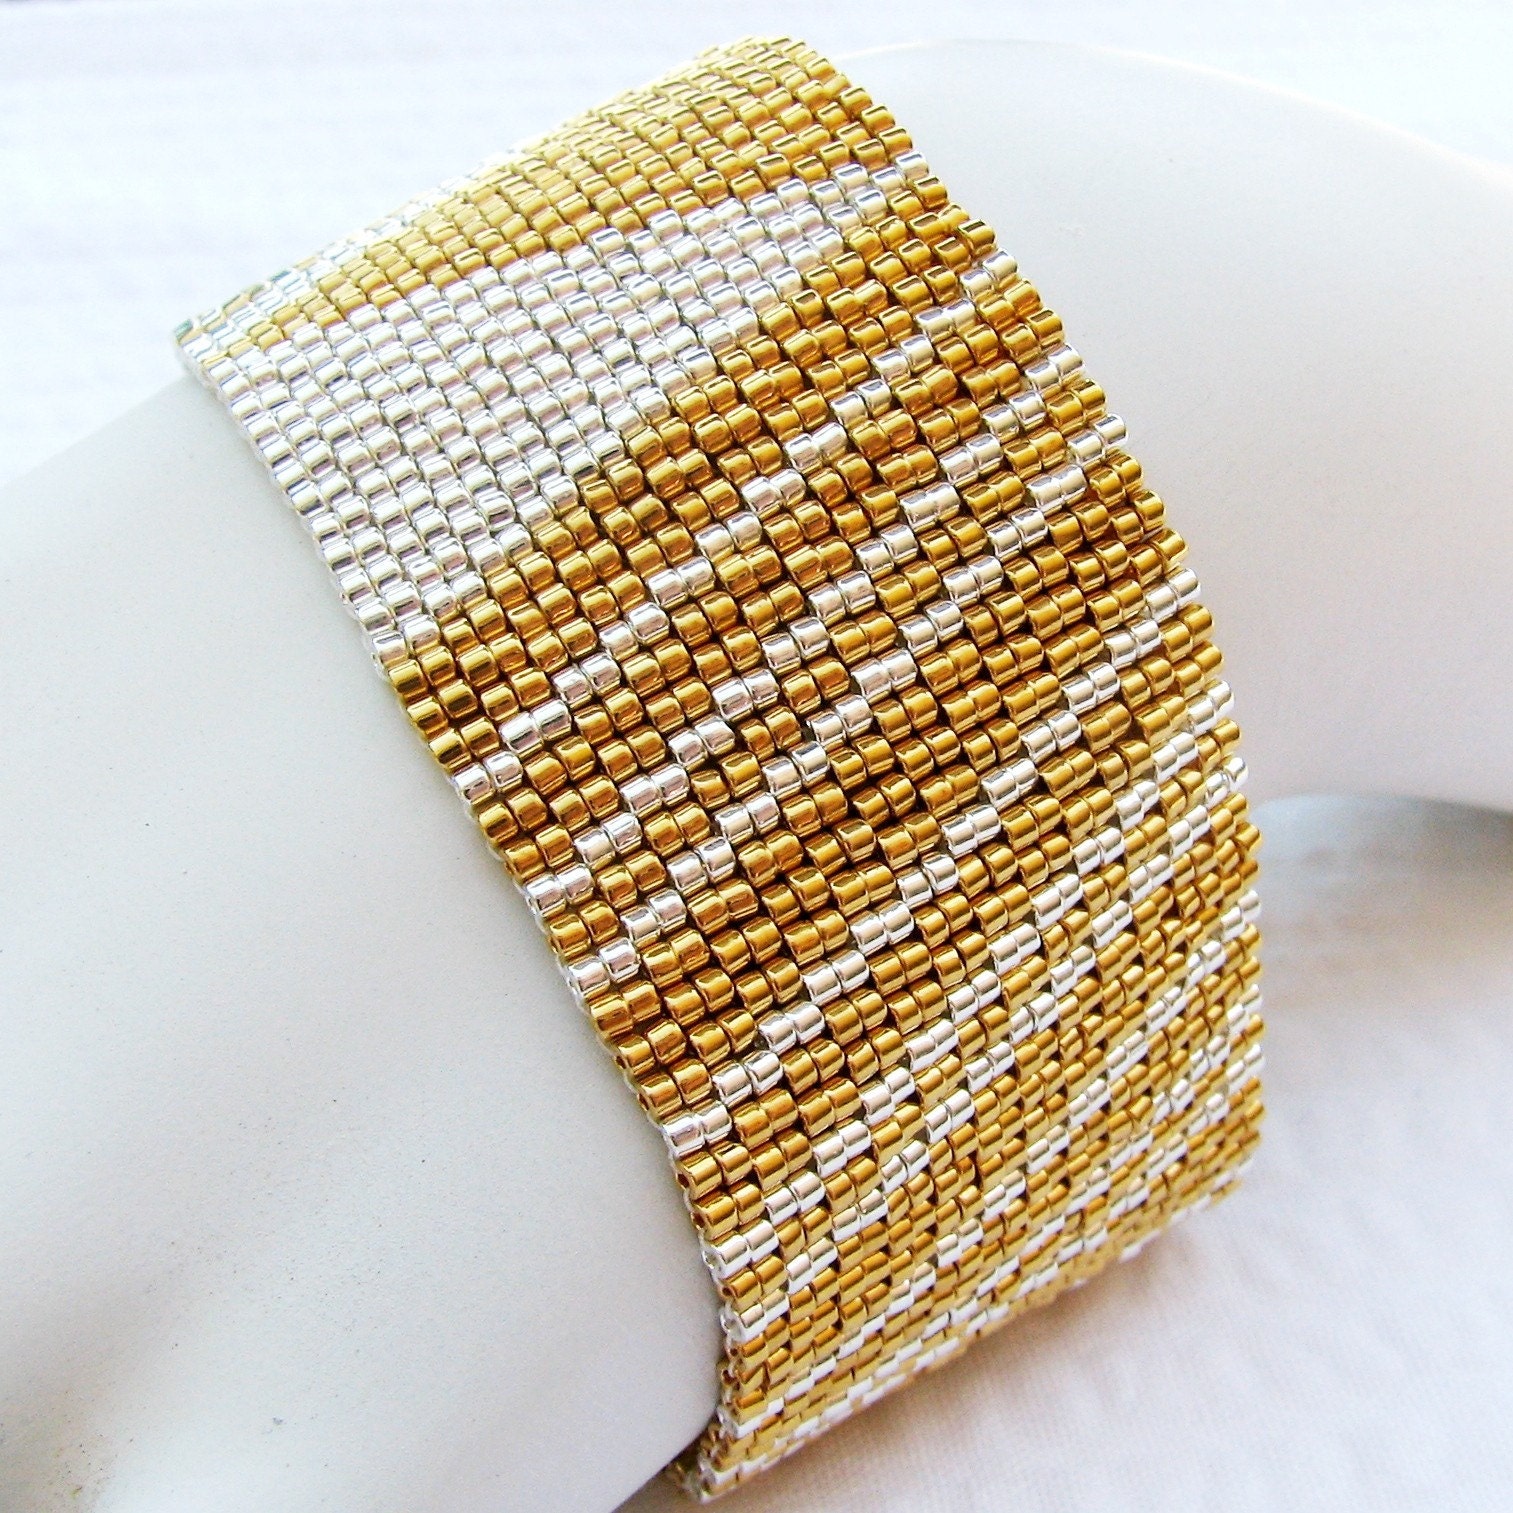 Duet in Silver and Gold Peyote Cuff Bracelet (2410)